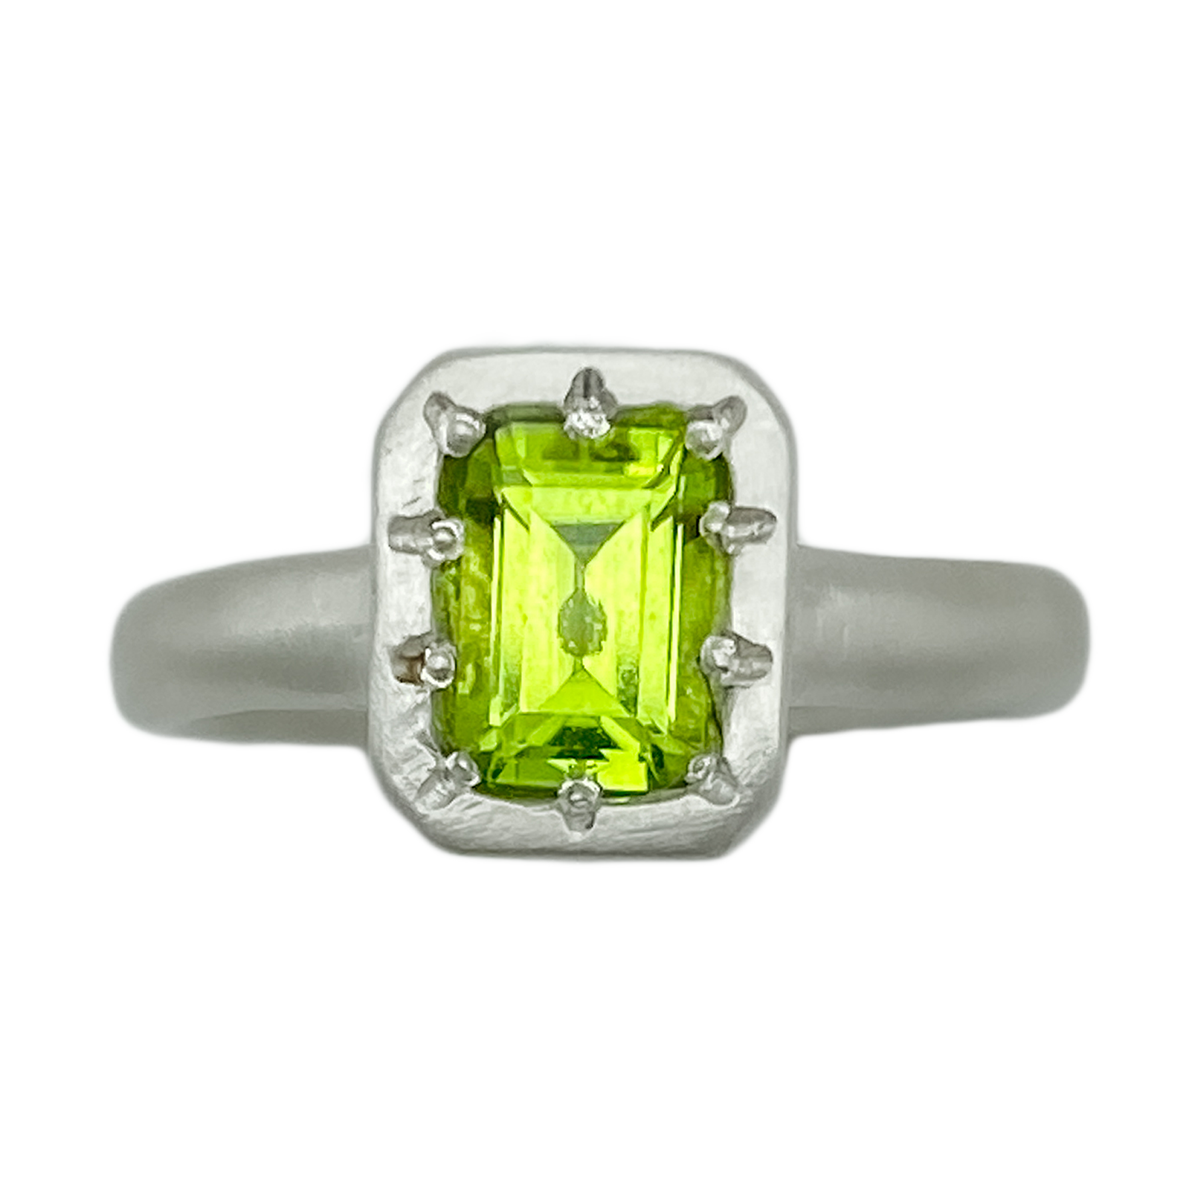 Envy Ring - Holliegraphic